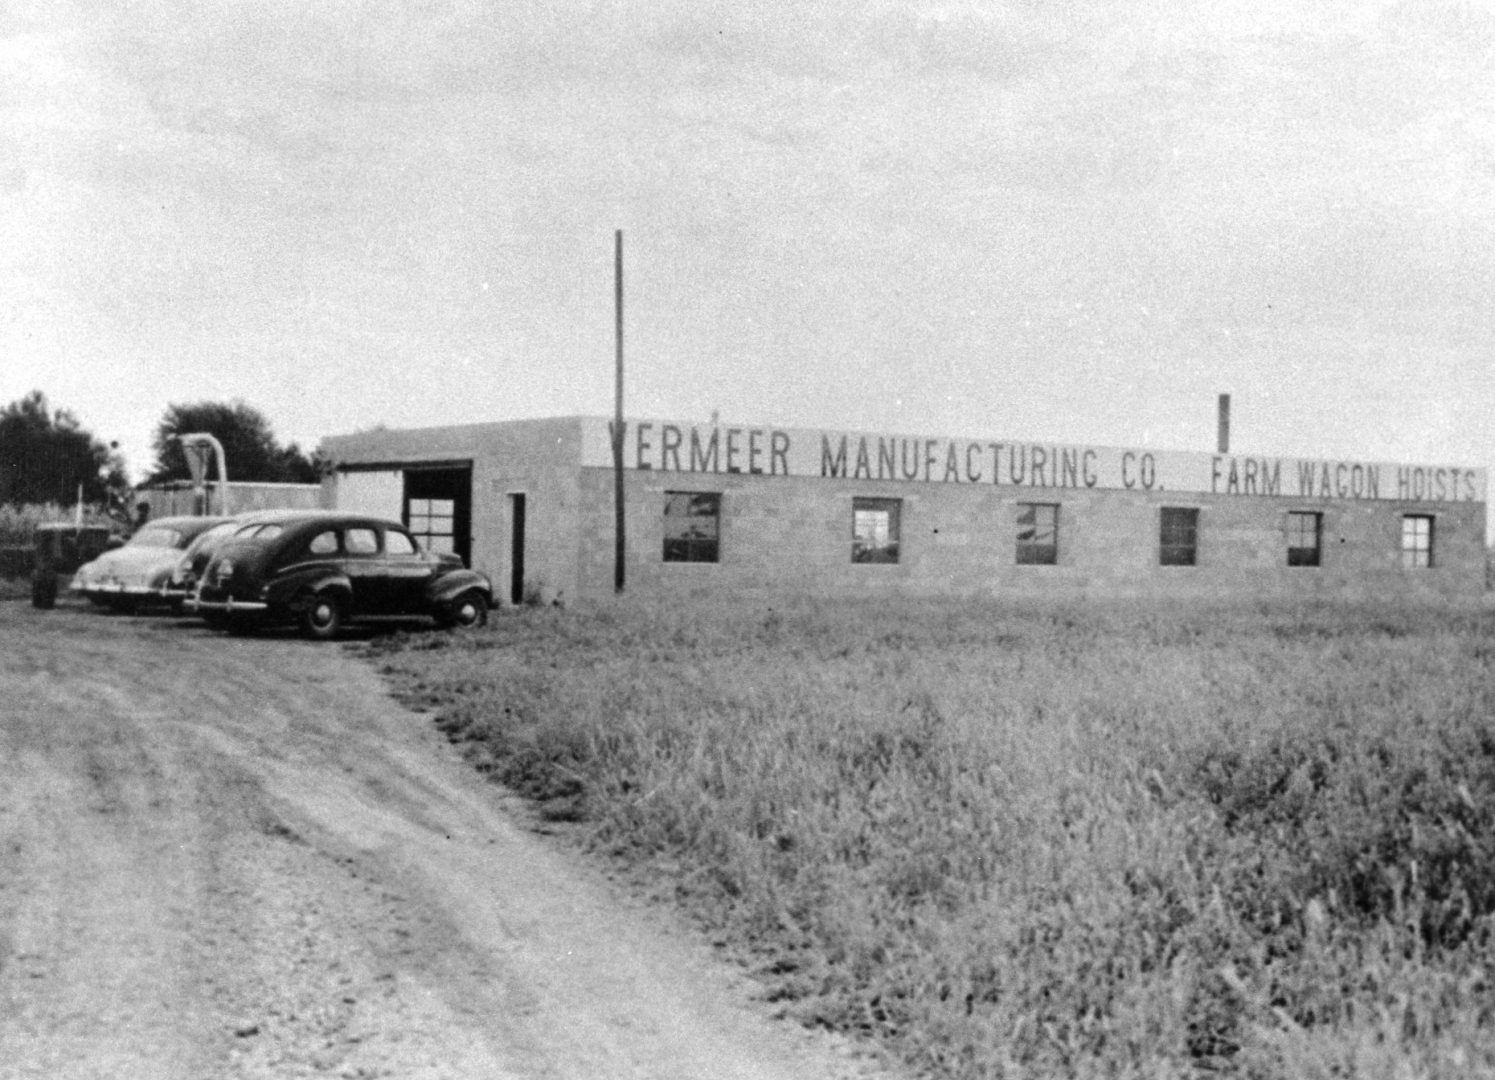 A historic photo of the Vermeer HQ